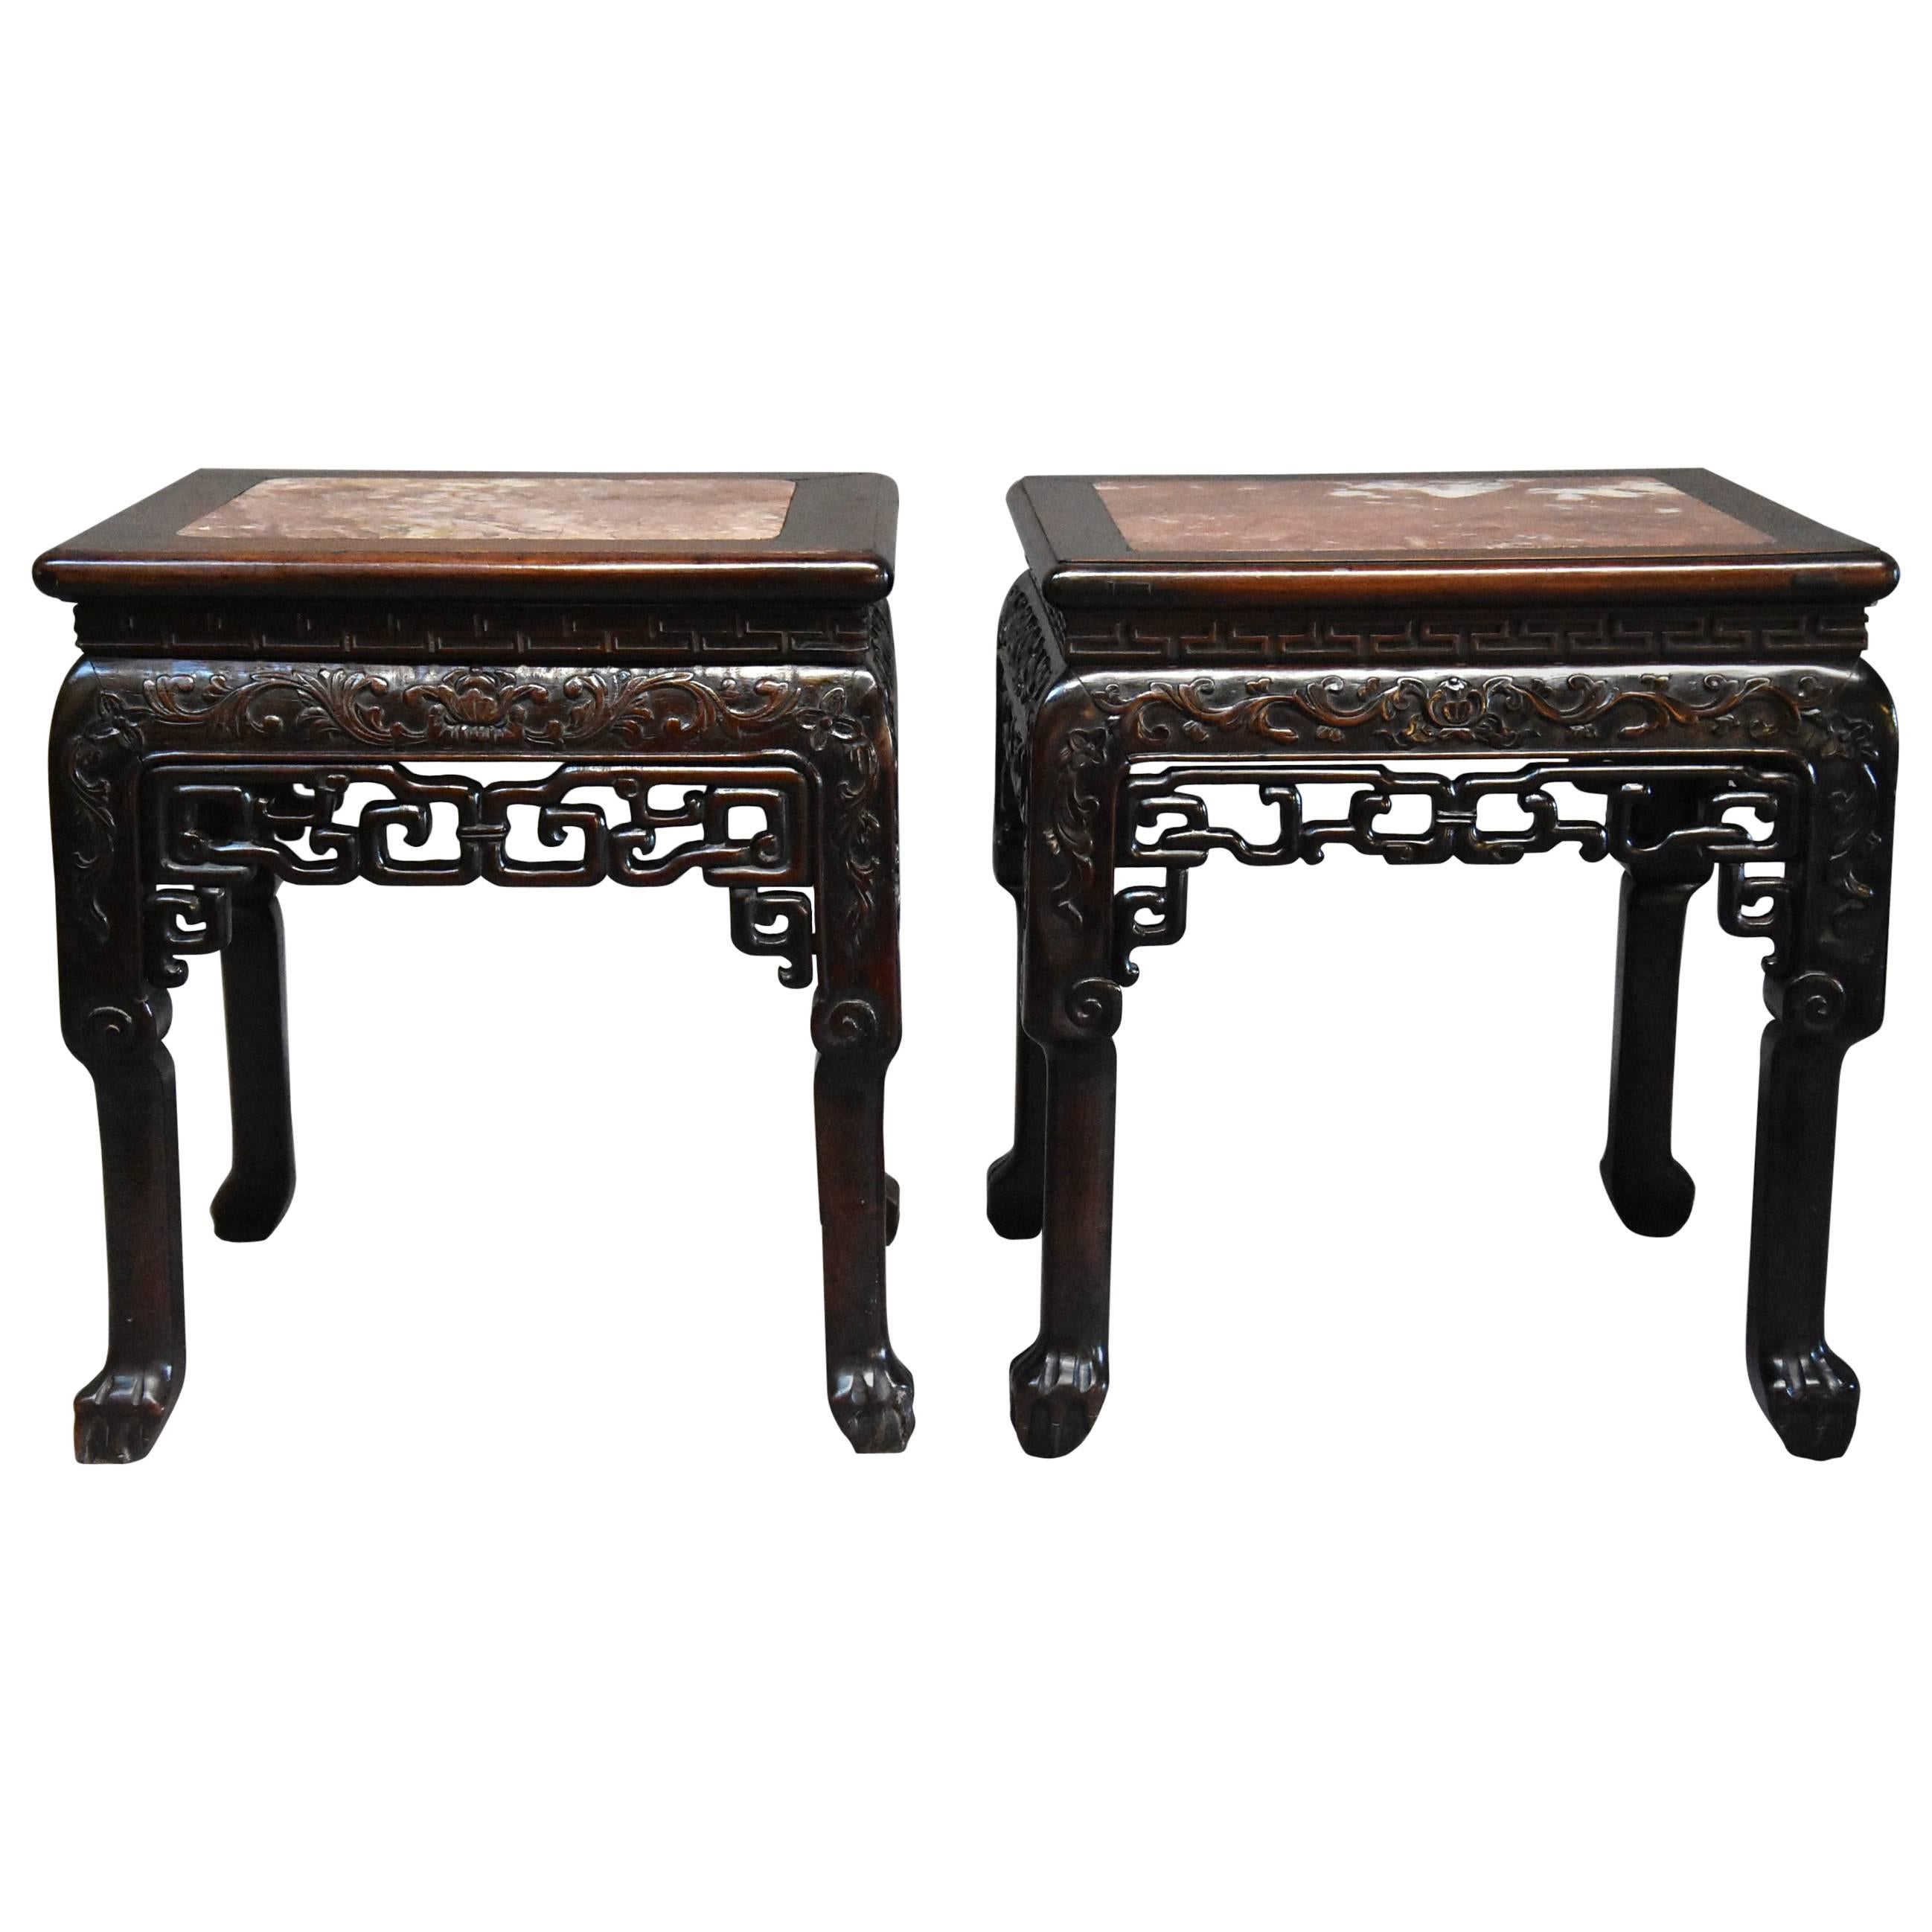 Late 19th Century Matched Pair of Square Chinese Pot Stands